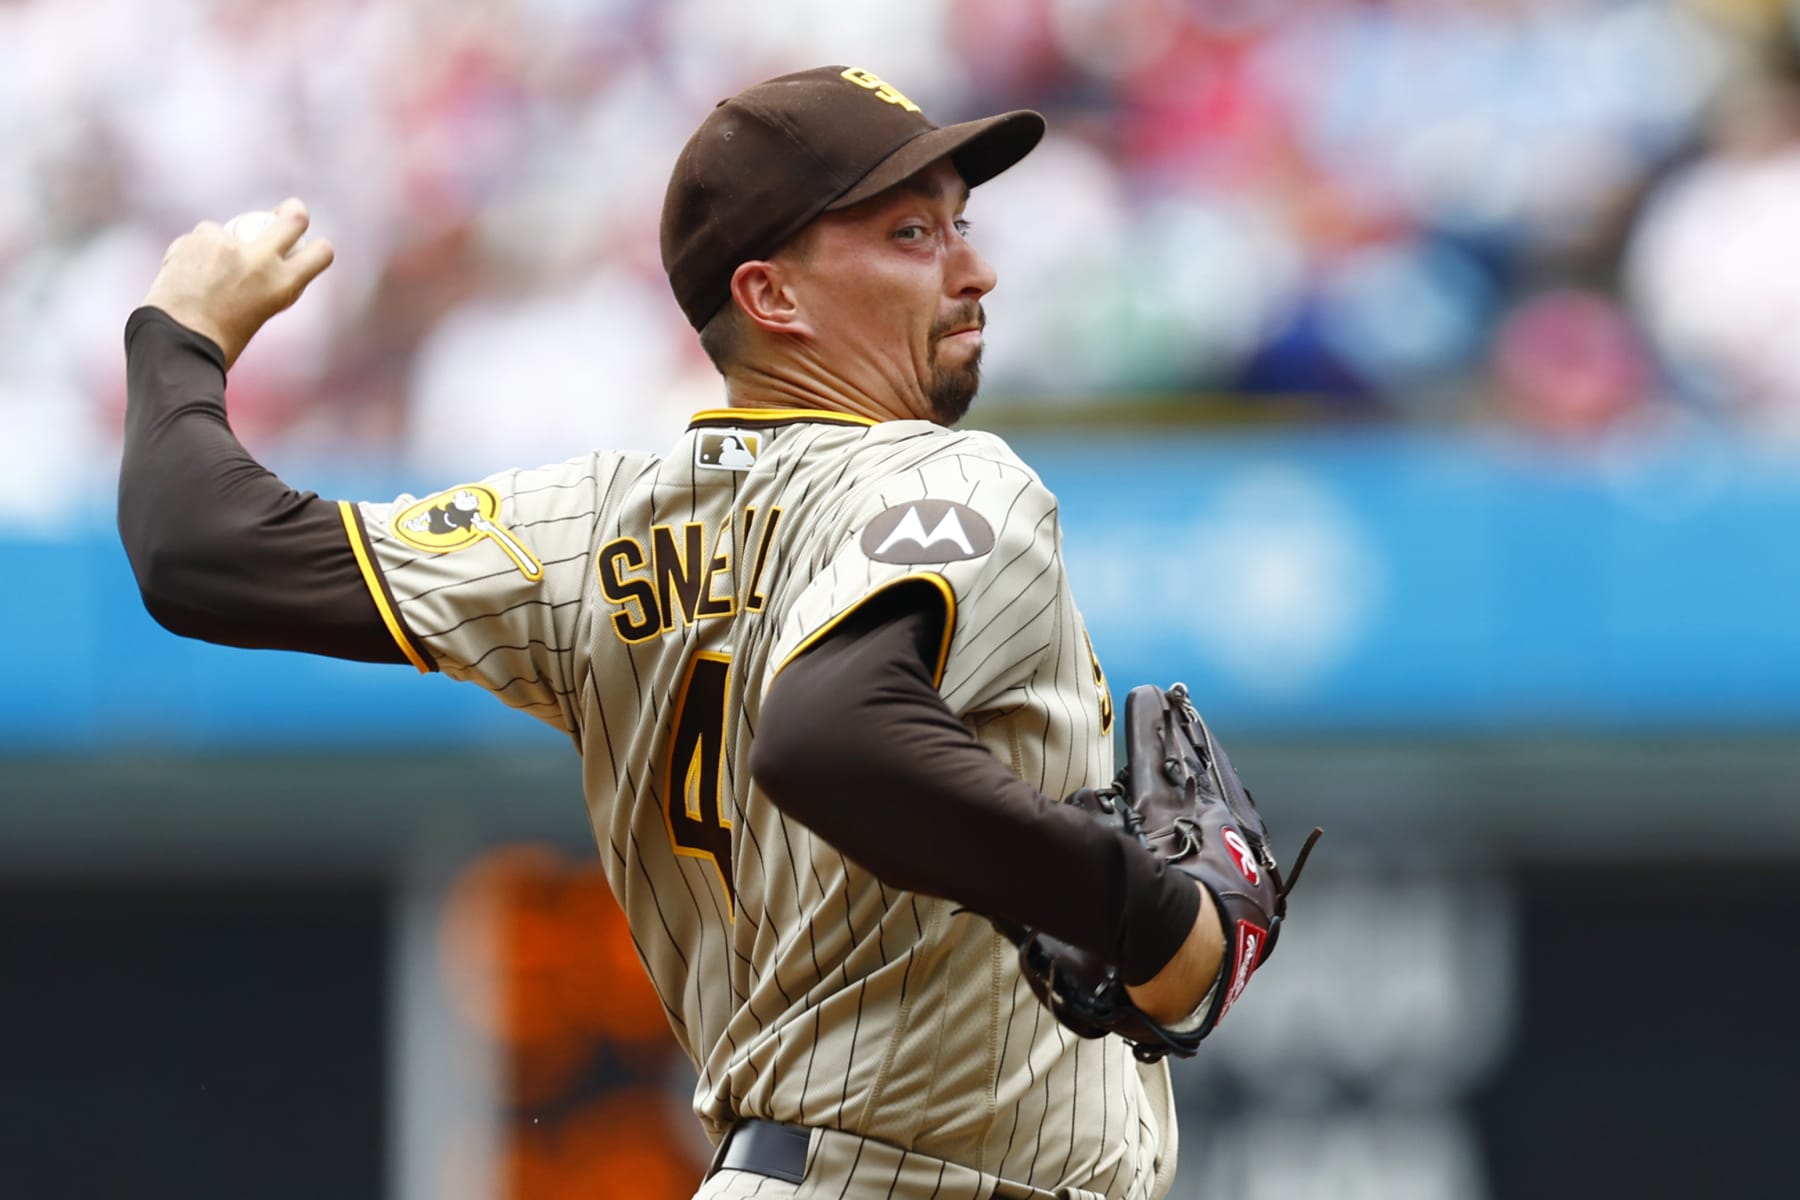 Former player says Blake Snell wants to re-sign with Padres